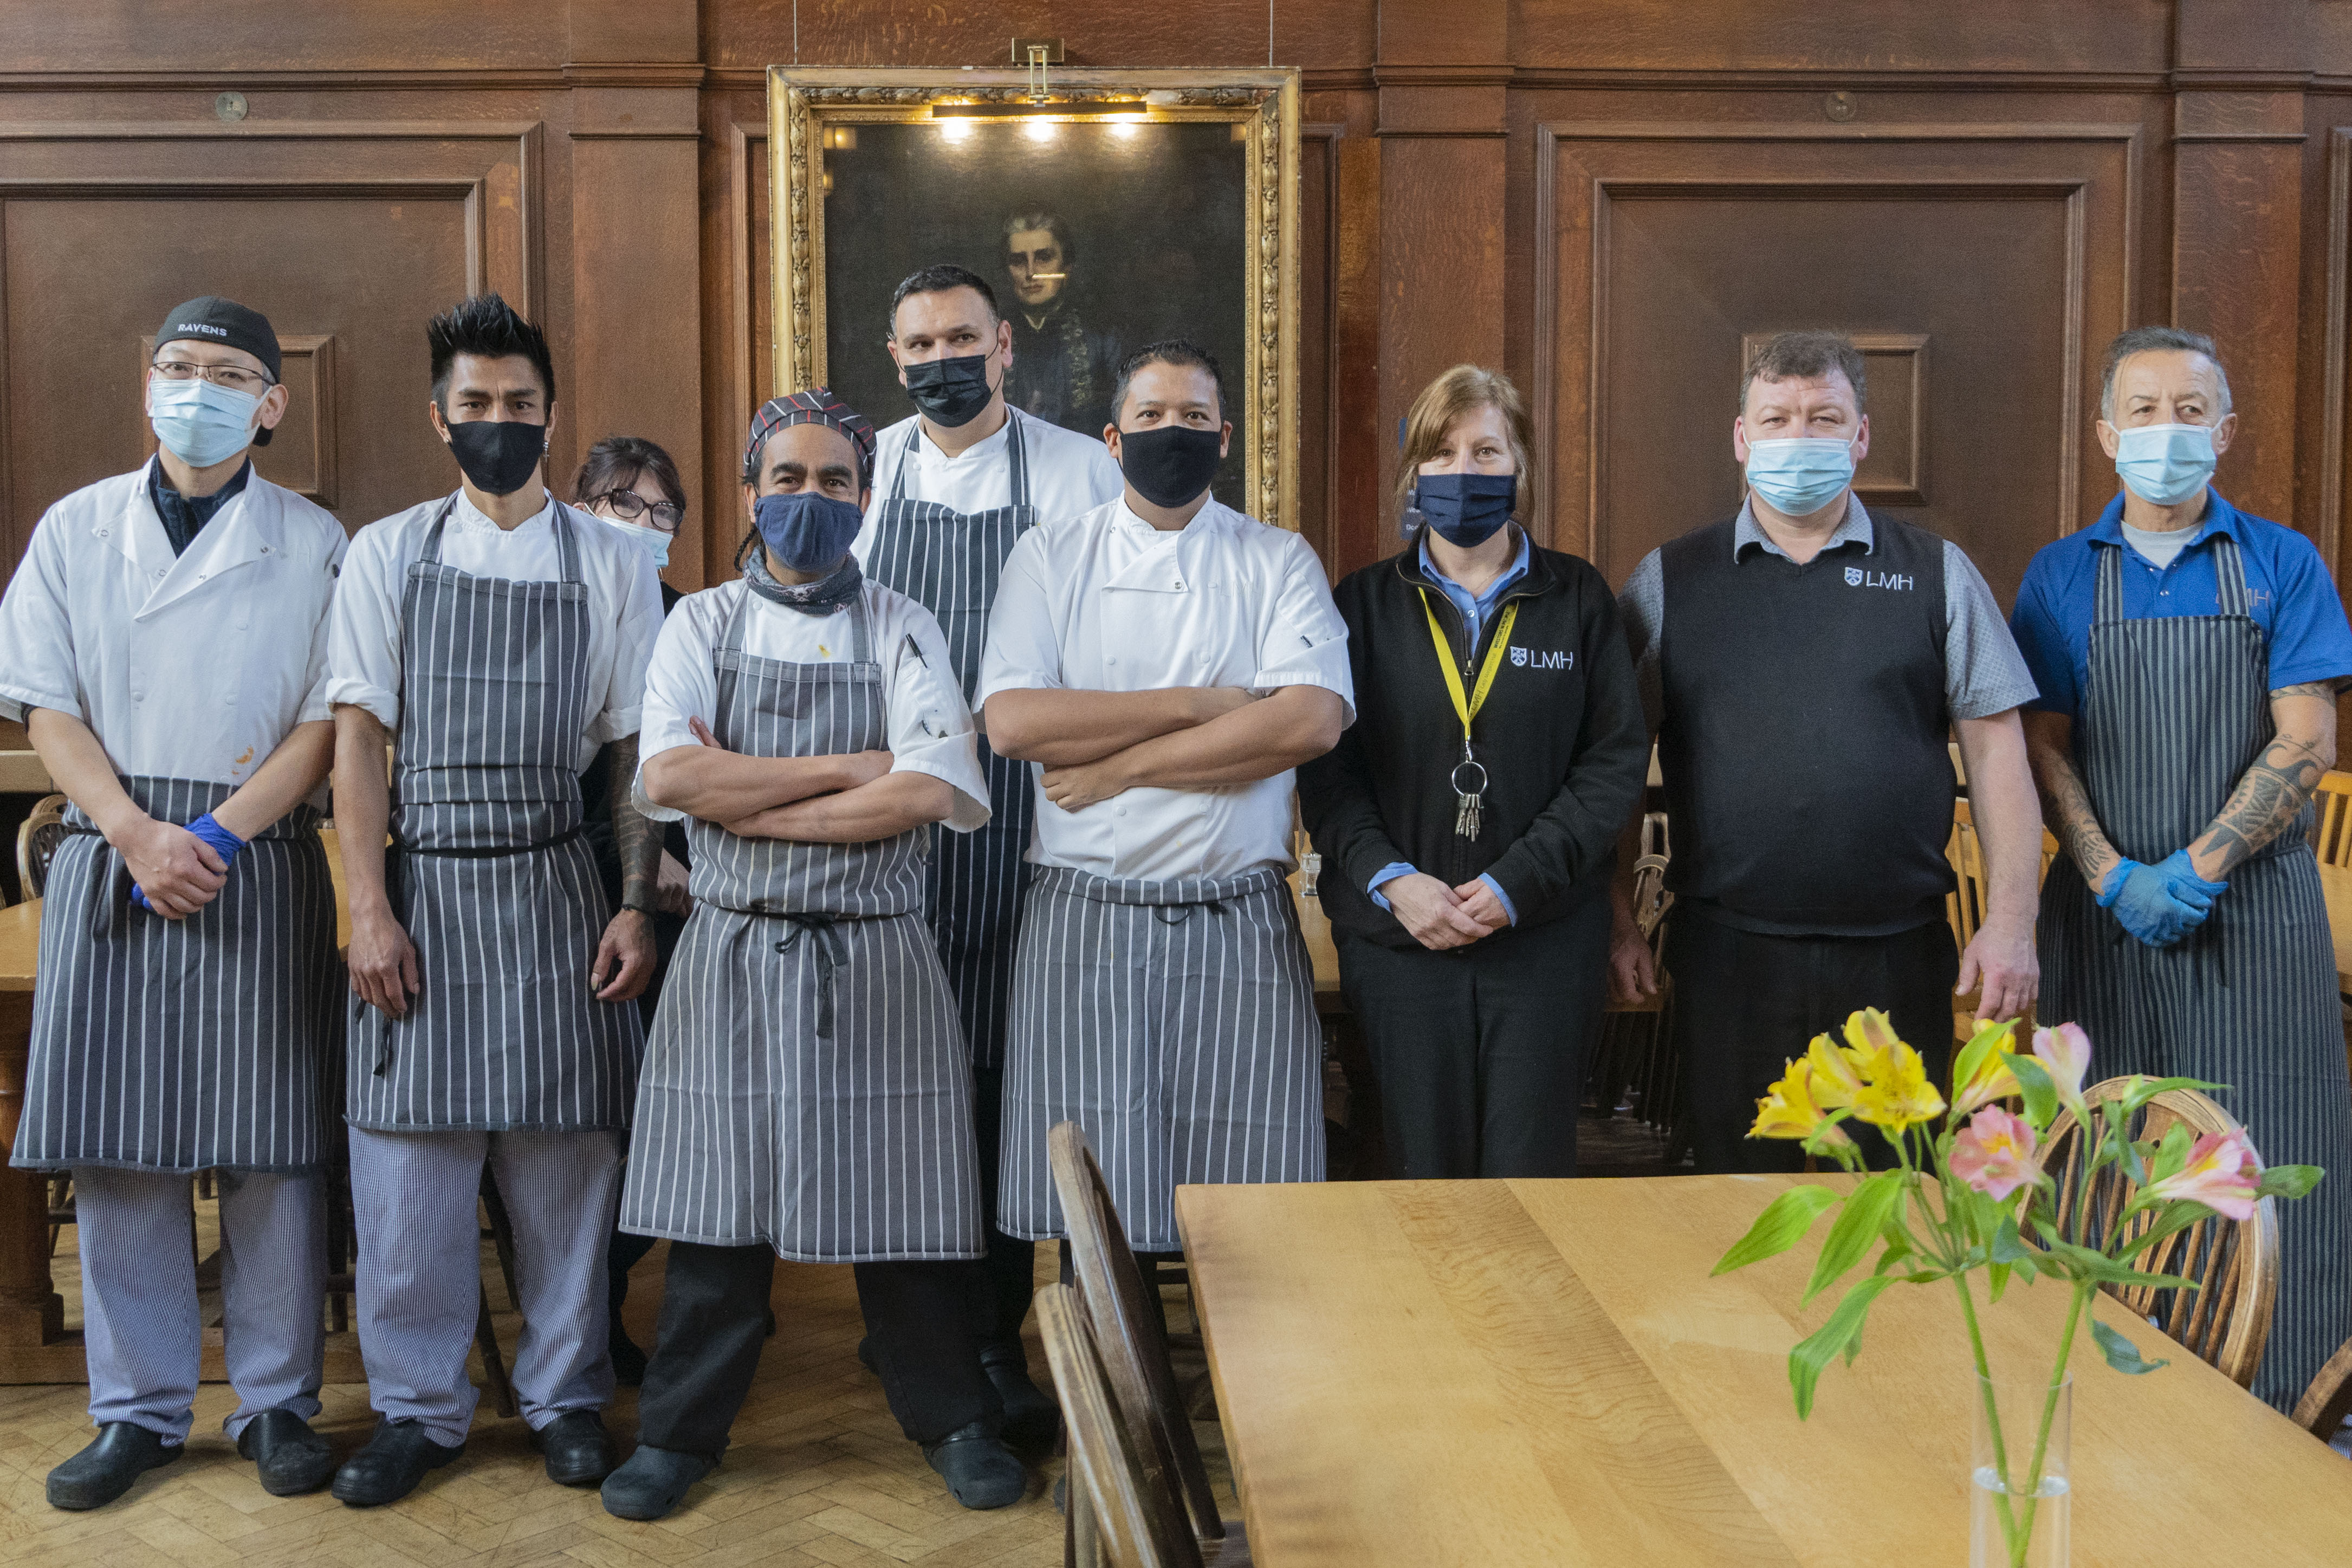 Members of the LMH Catering Team standing in the Dining Hall